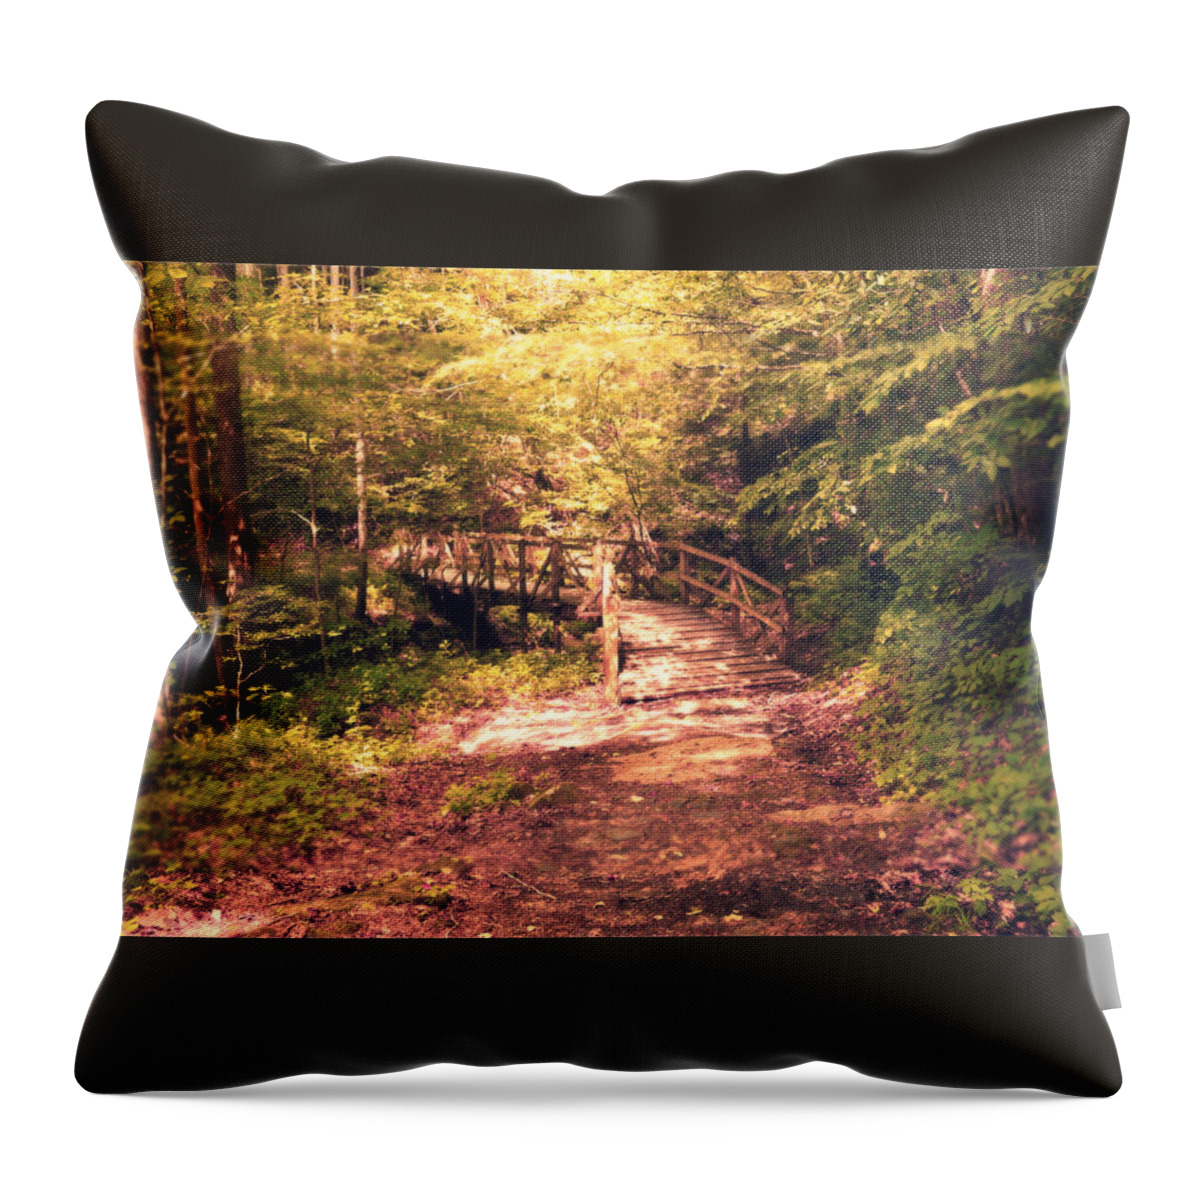 Foot Bridge Throw Pillow featuring the photograph The Enchanted Bridge by Stacie Siemsen